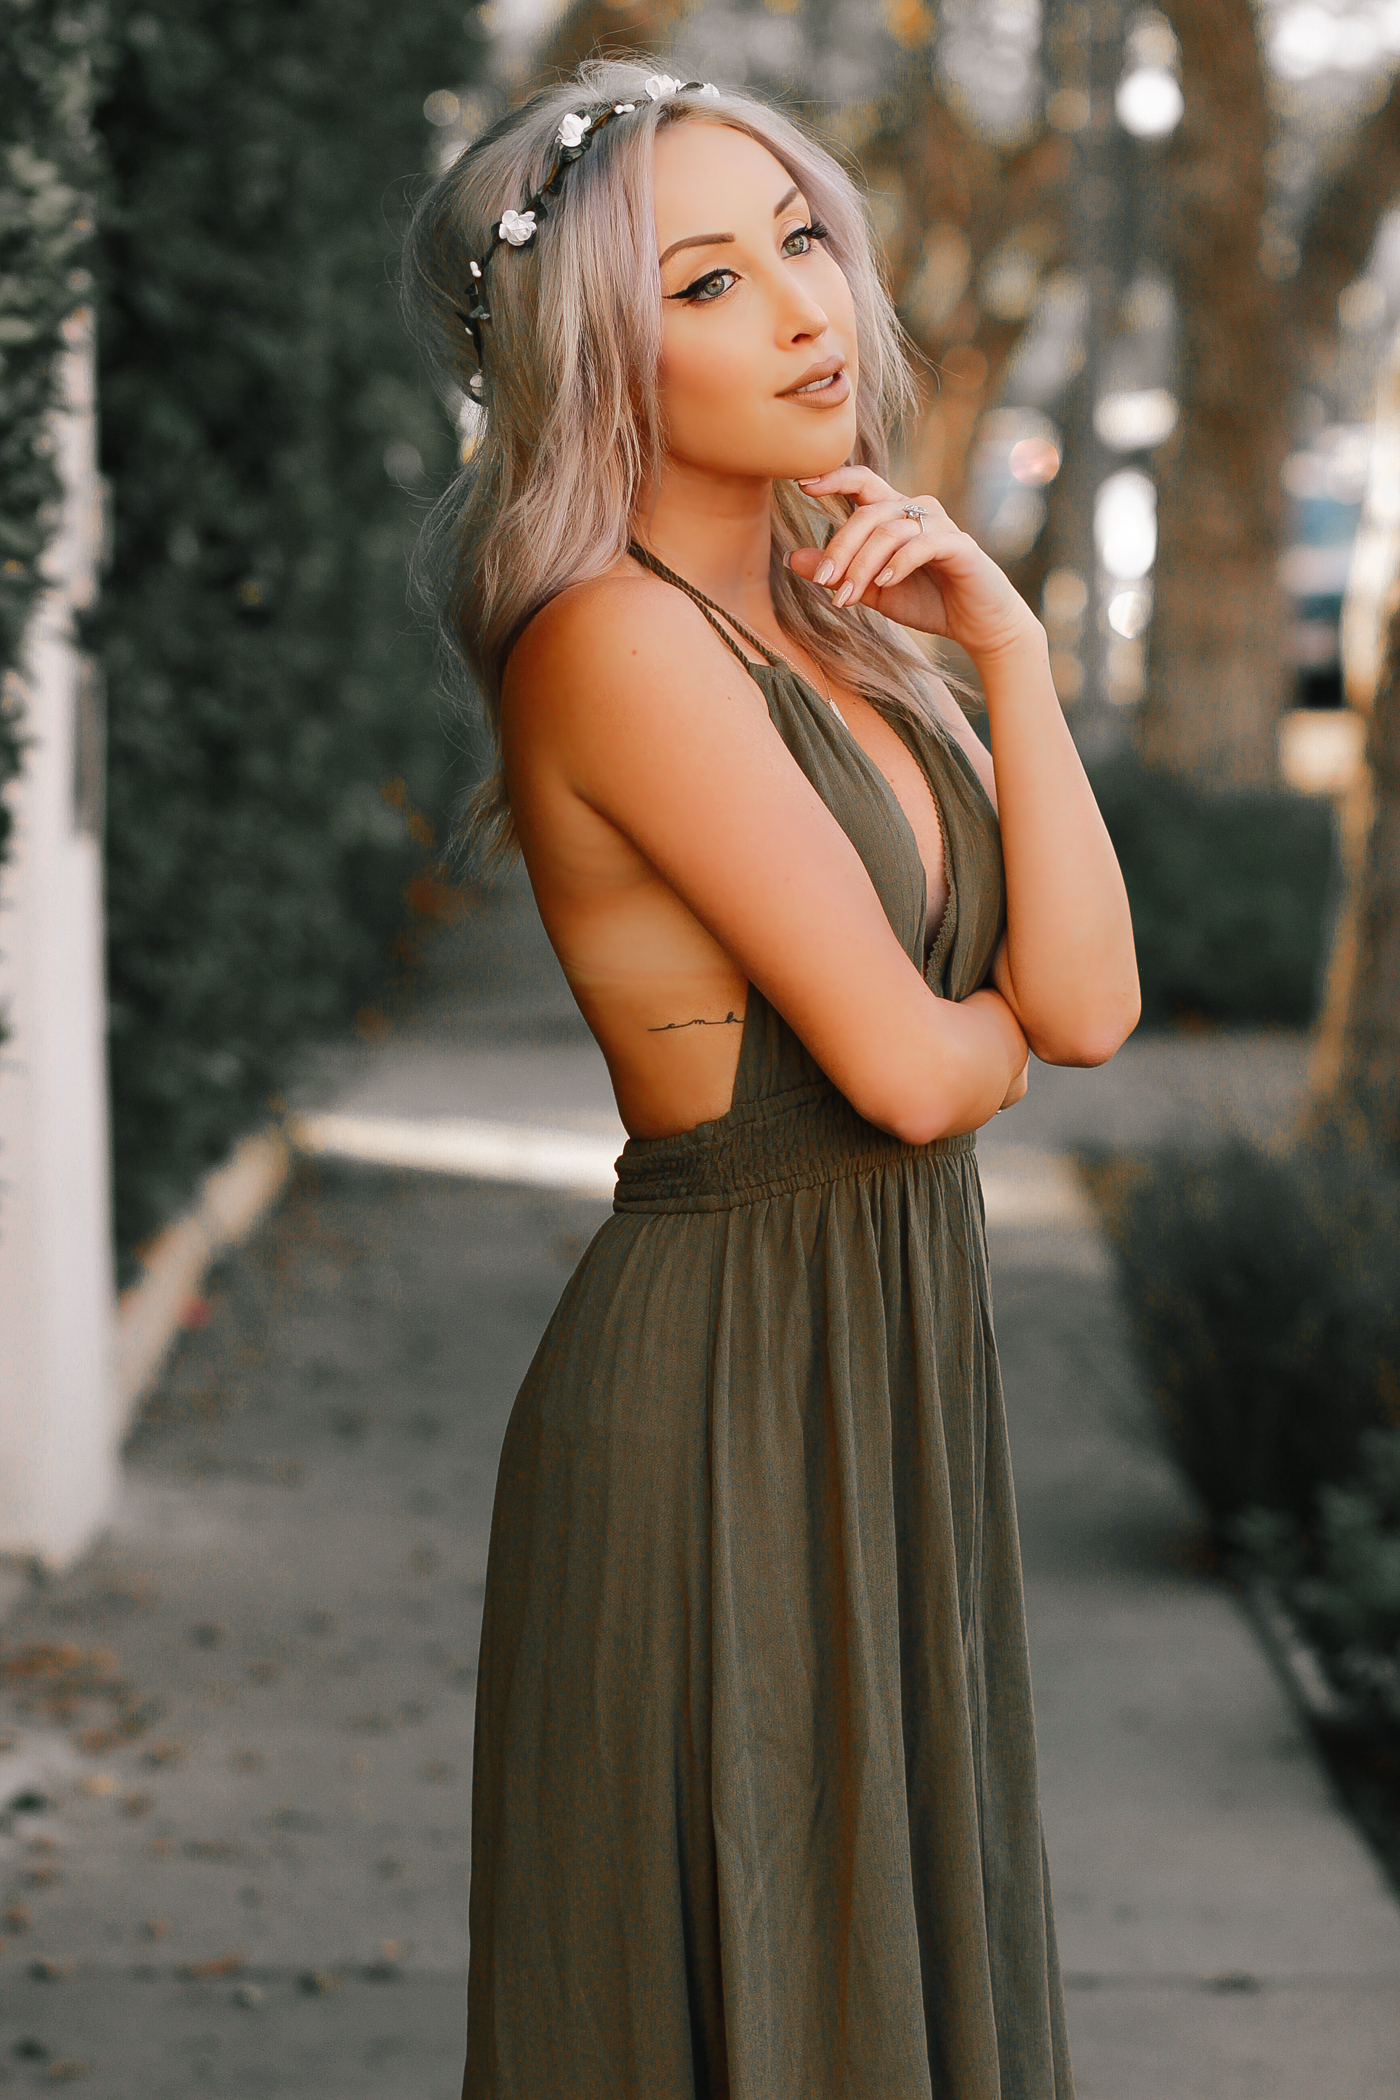 Blondie in the City | Forest Green Maxi Dress @forever21 | Fall Fashion, Boho Style